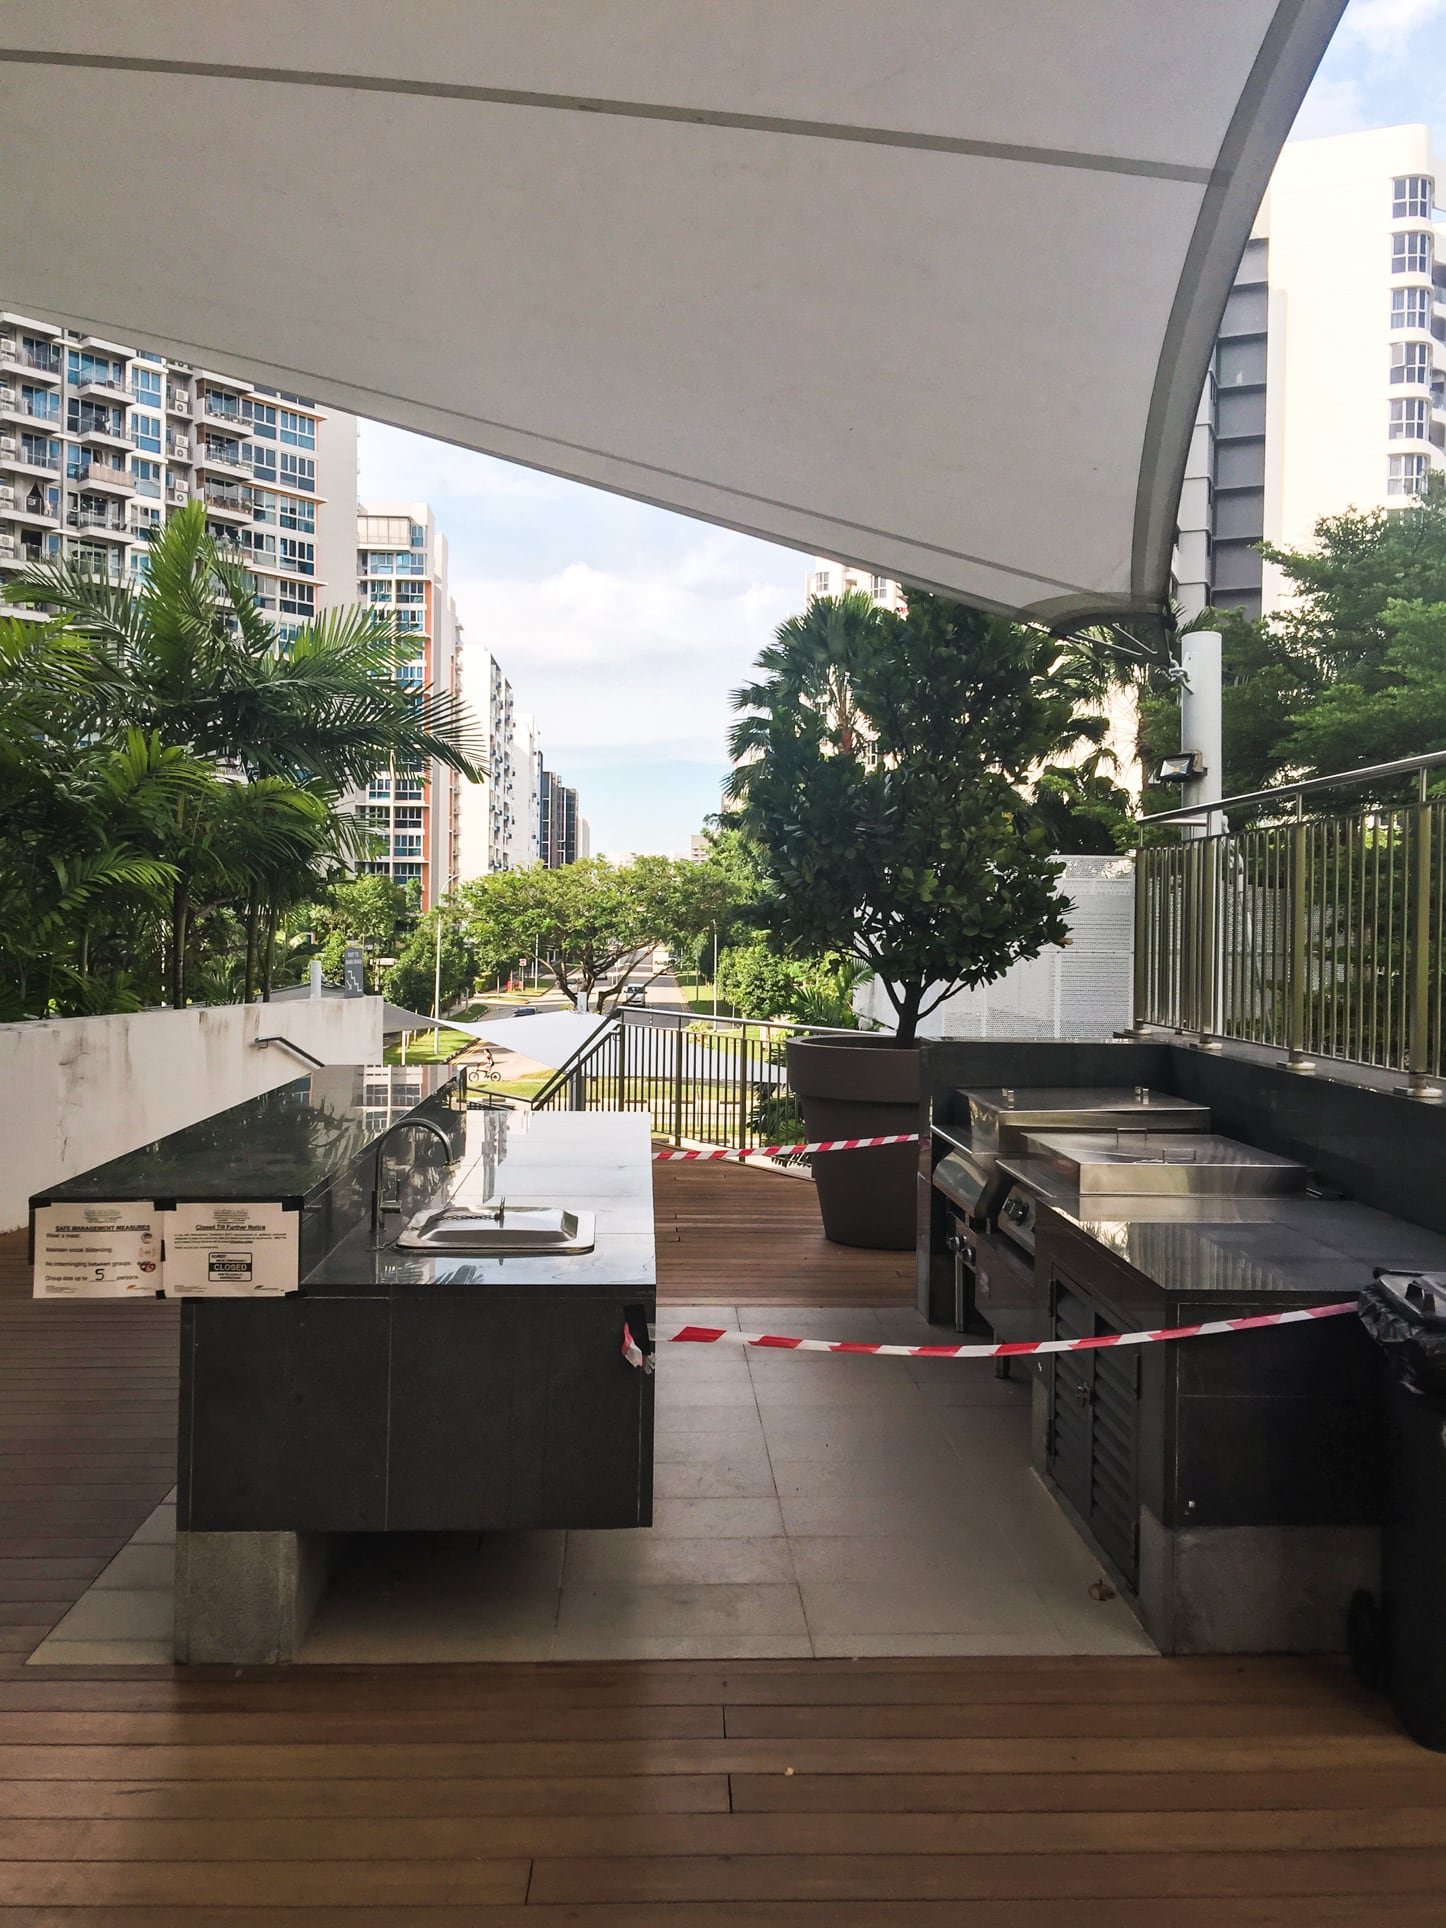 waterview condo bbq